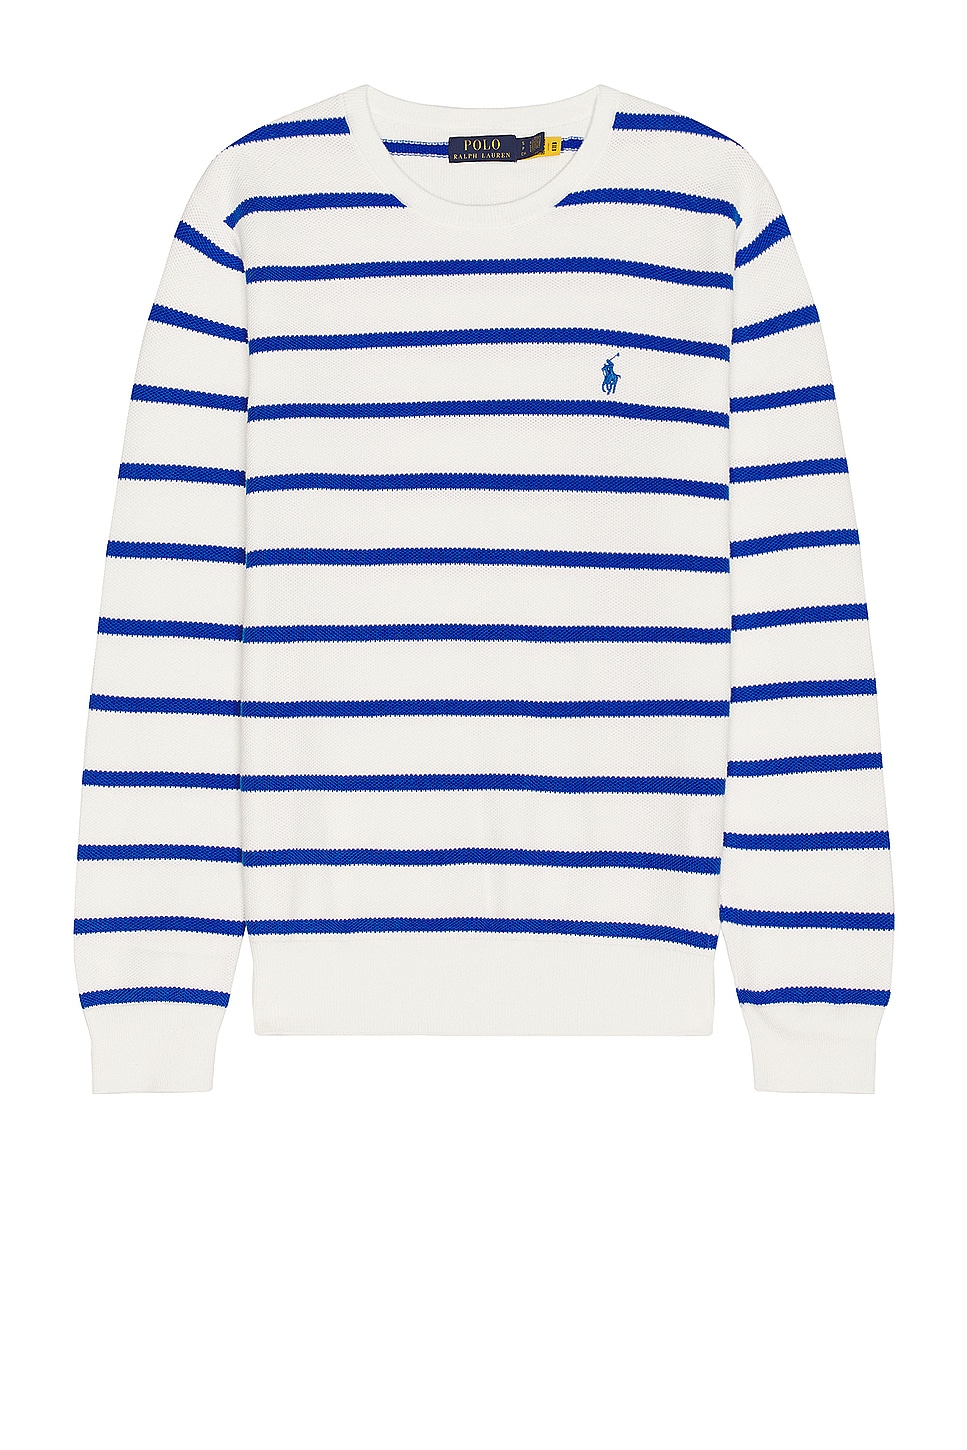 Image 1 of Polo Ralph Lauren Textured Sweater in Deckwash White Combo